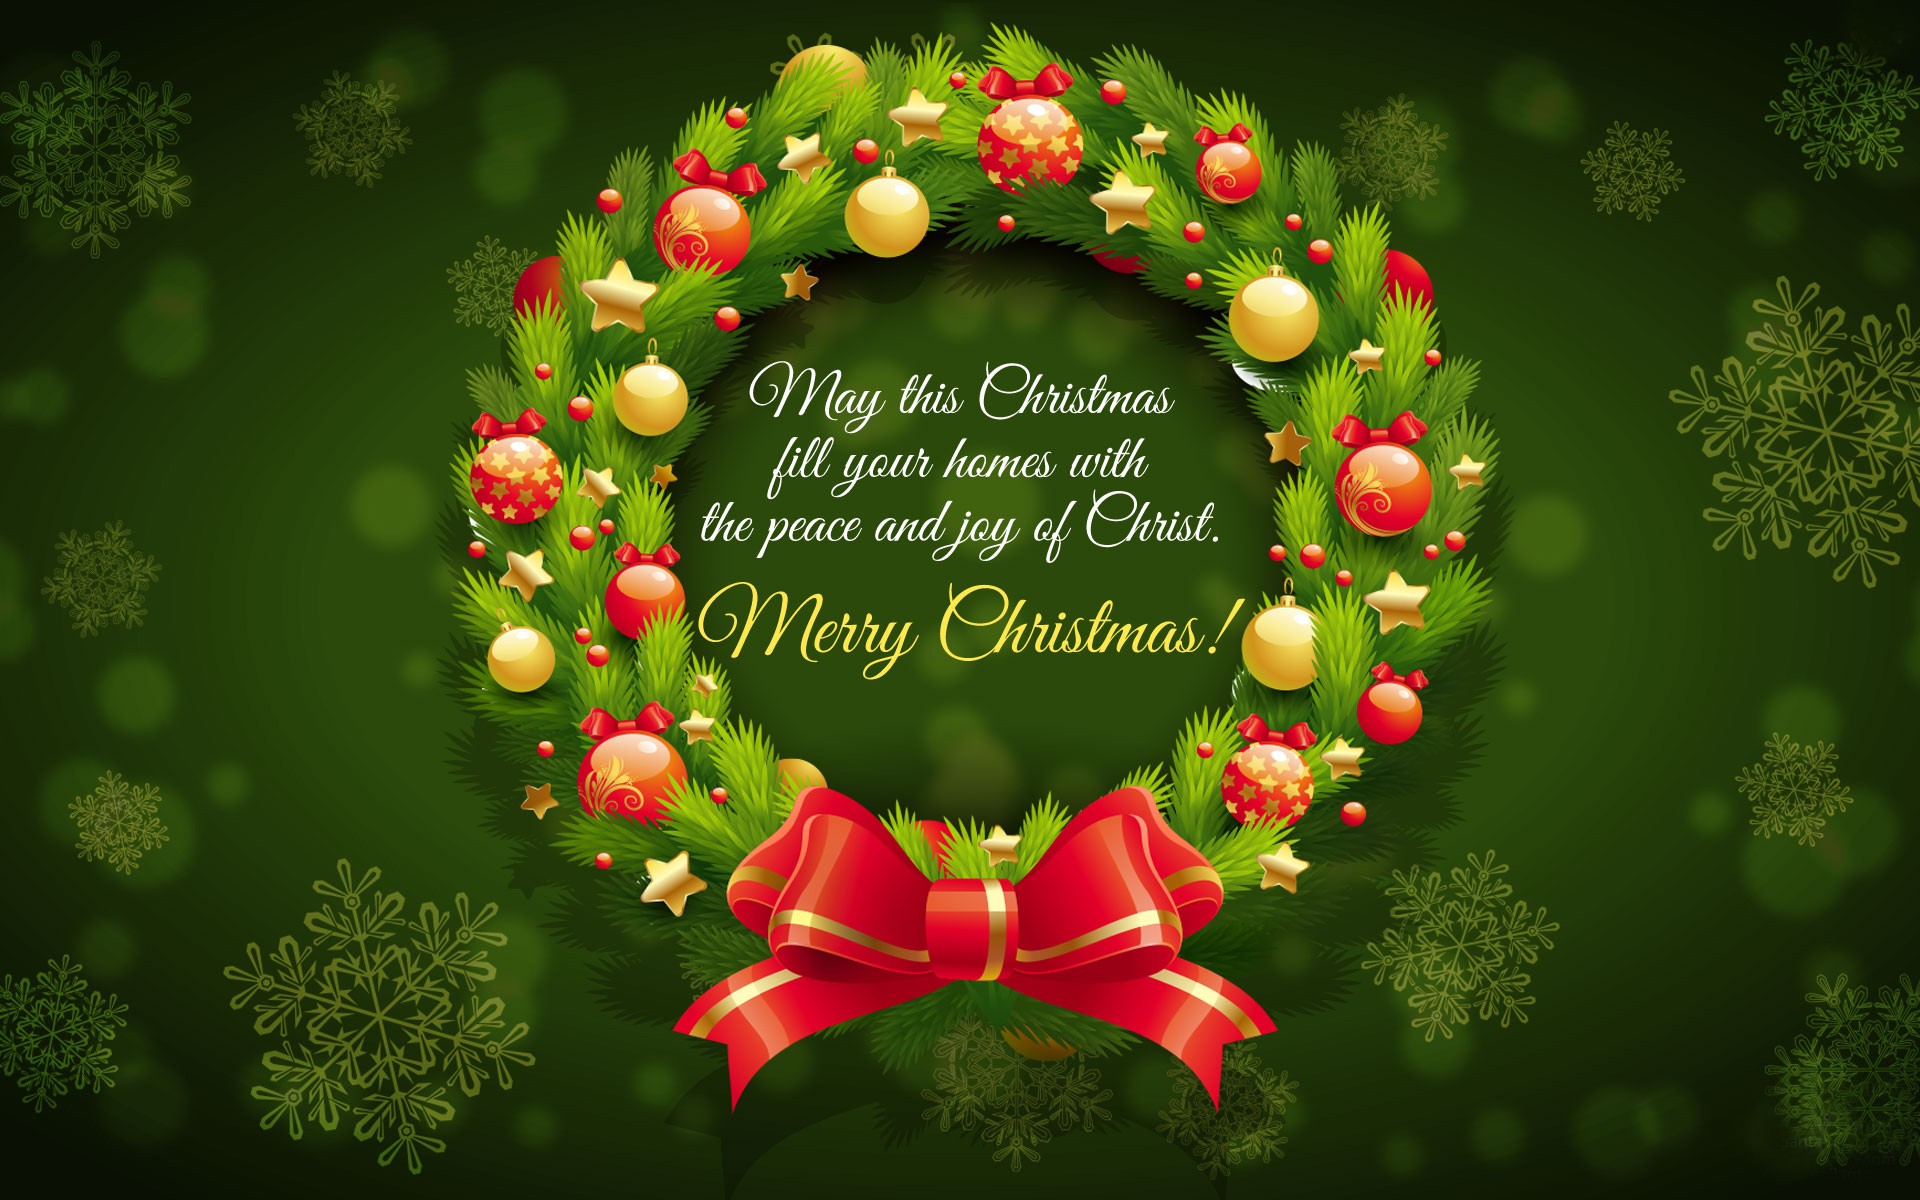 Greetings For Christmas Messages Greetingsforchristmas